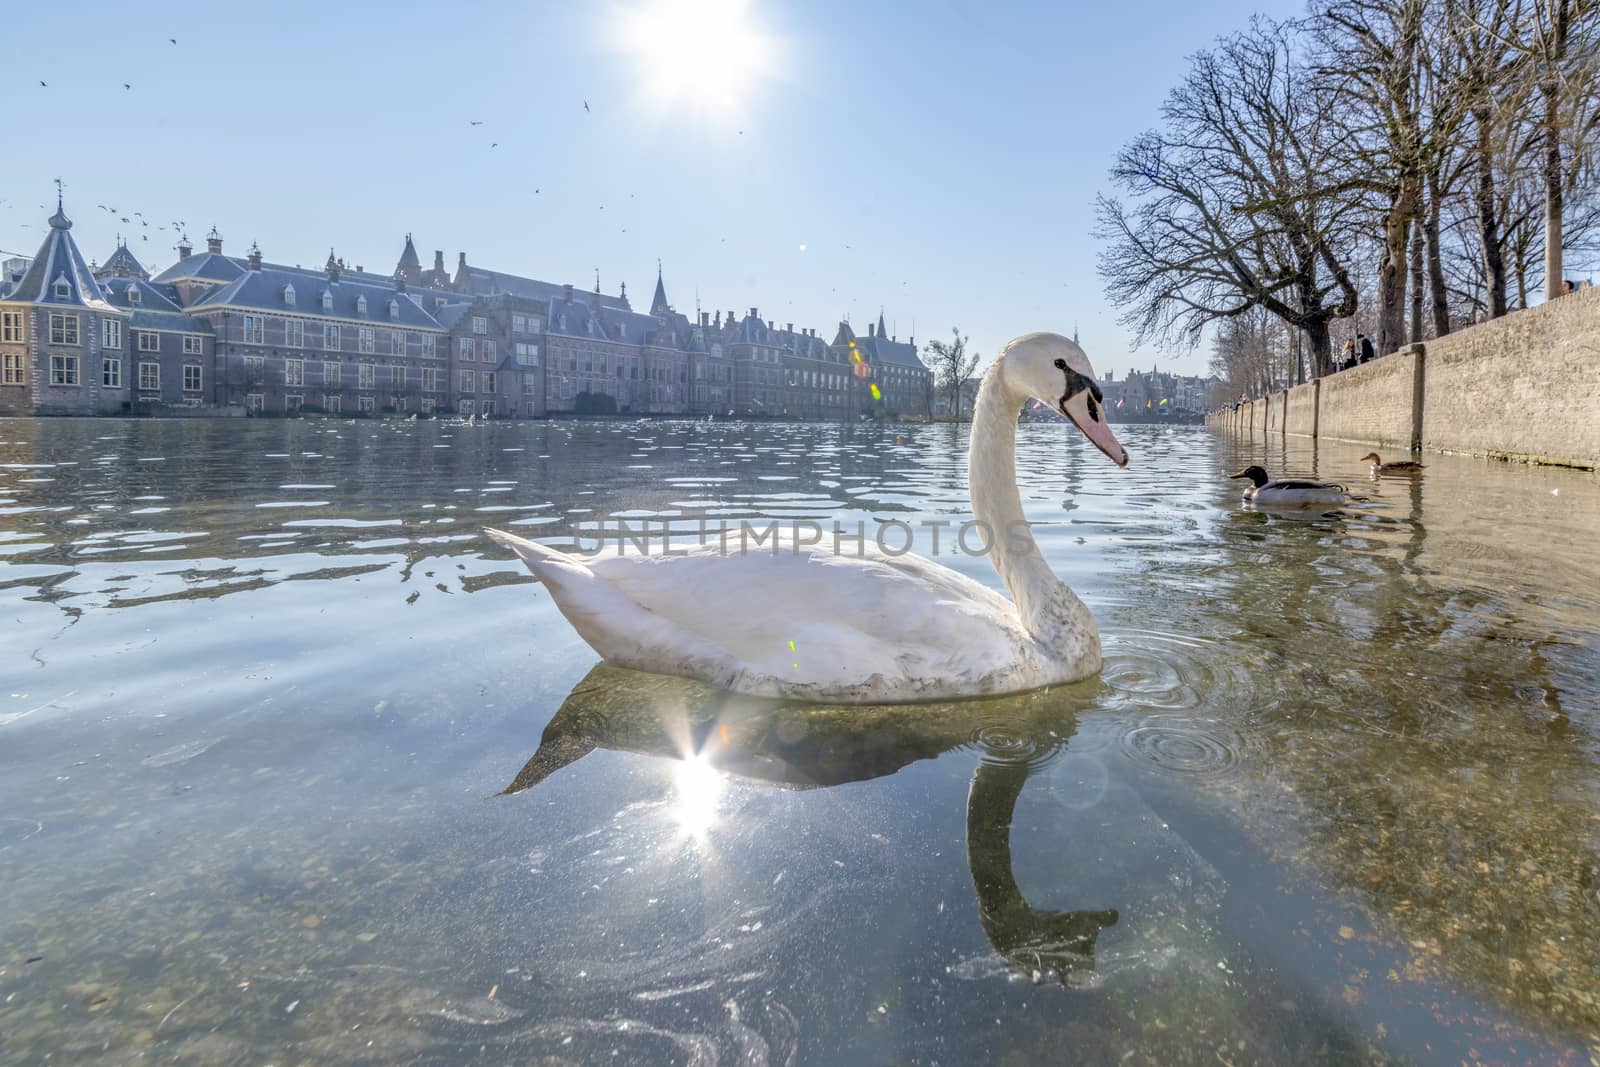 White swan swimming on the pond of Hofvijver, the Dutch parliament building and under a bright and warm late winter sun light, The Hague, Netherlands by ankorlight